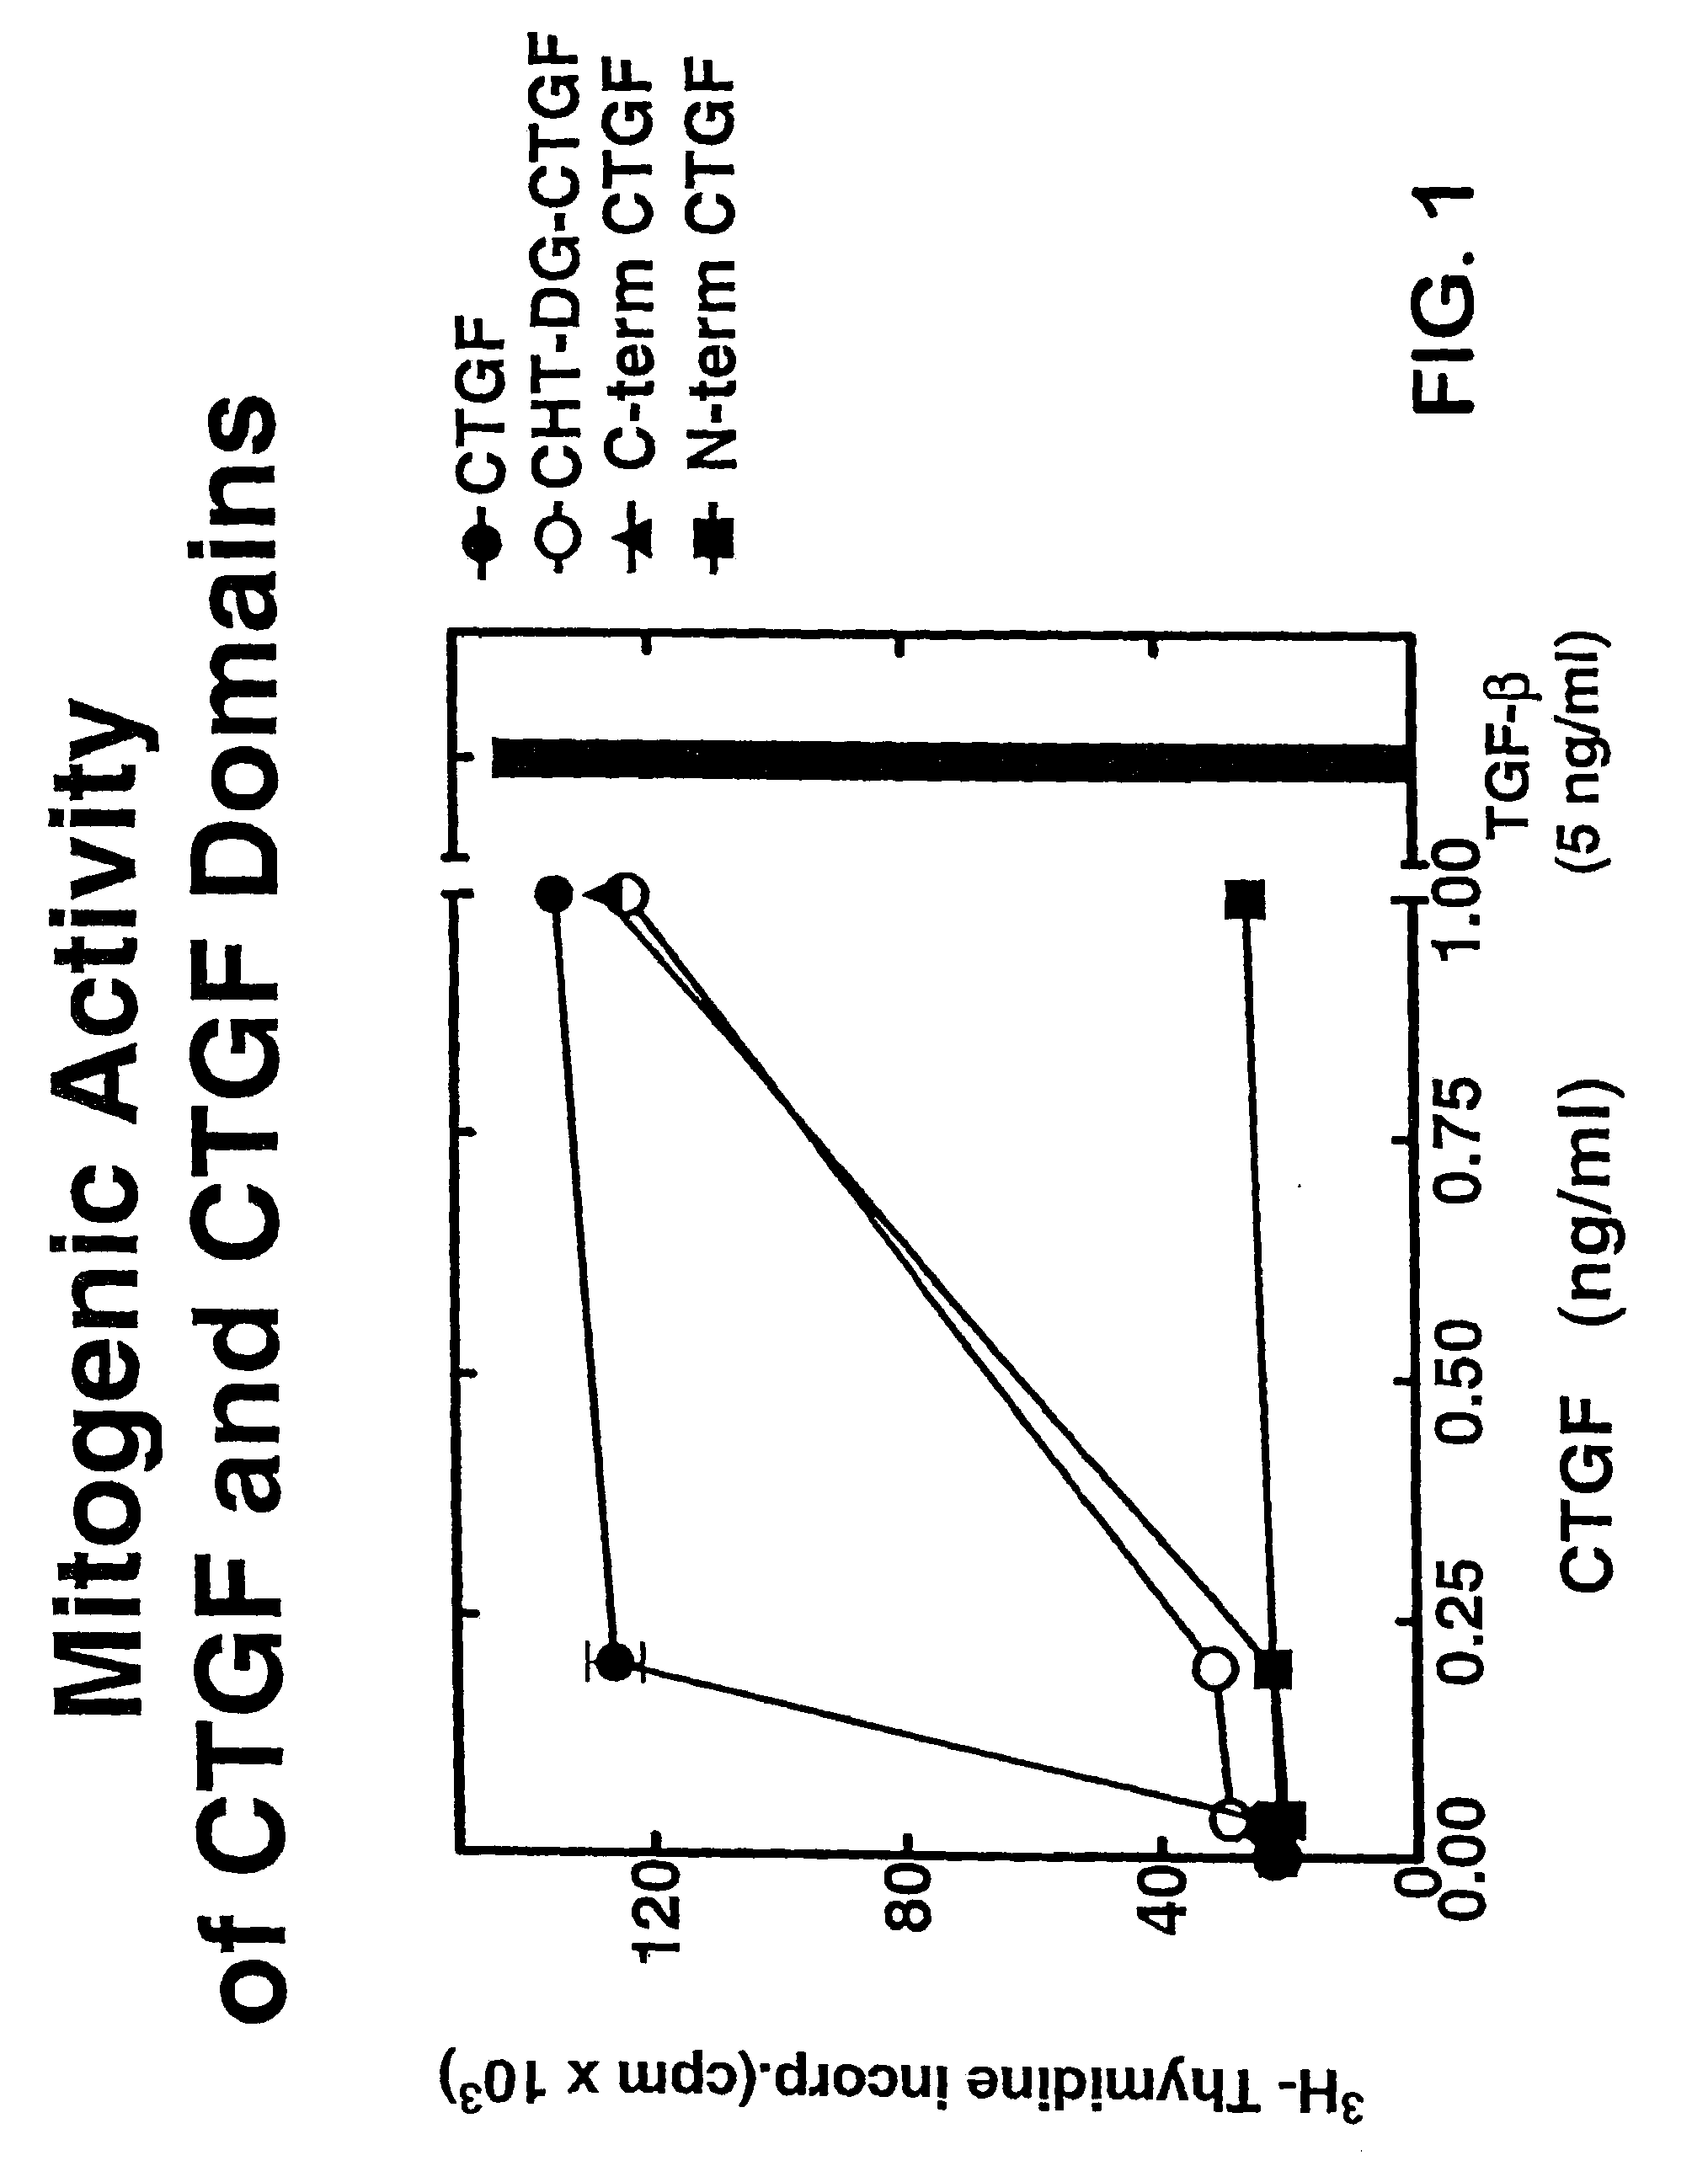 Connective tissue growth factor fragments and methods and uses thereof